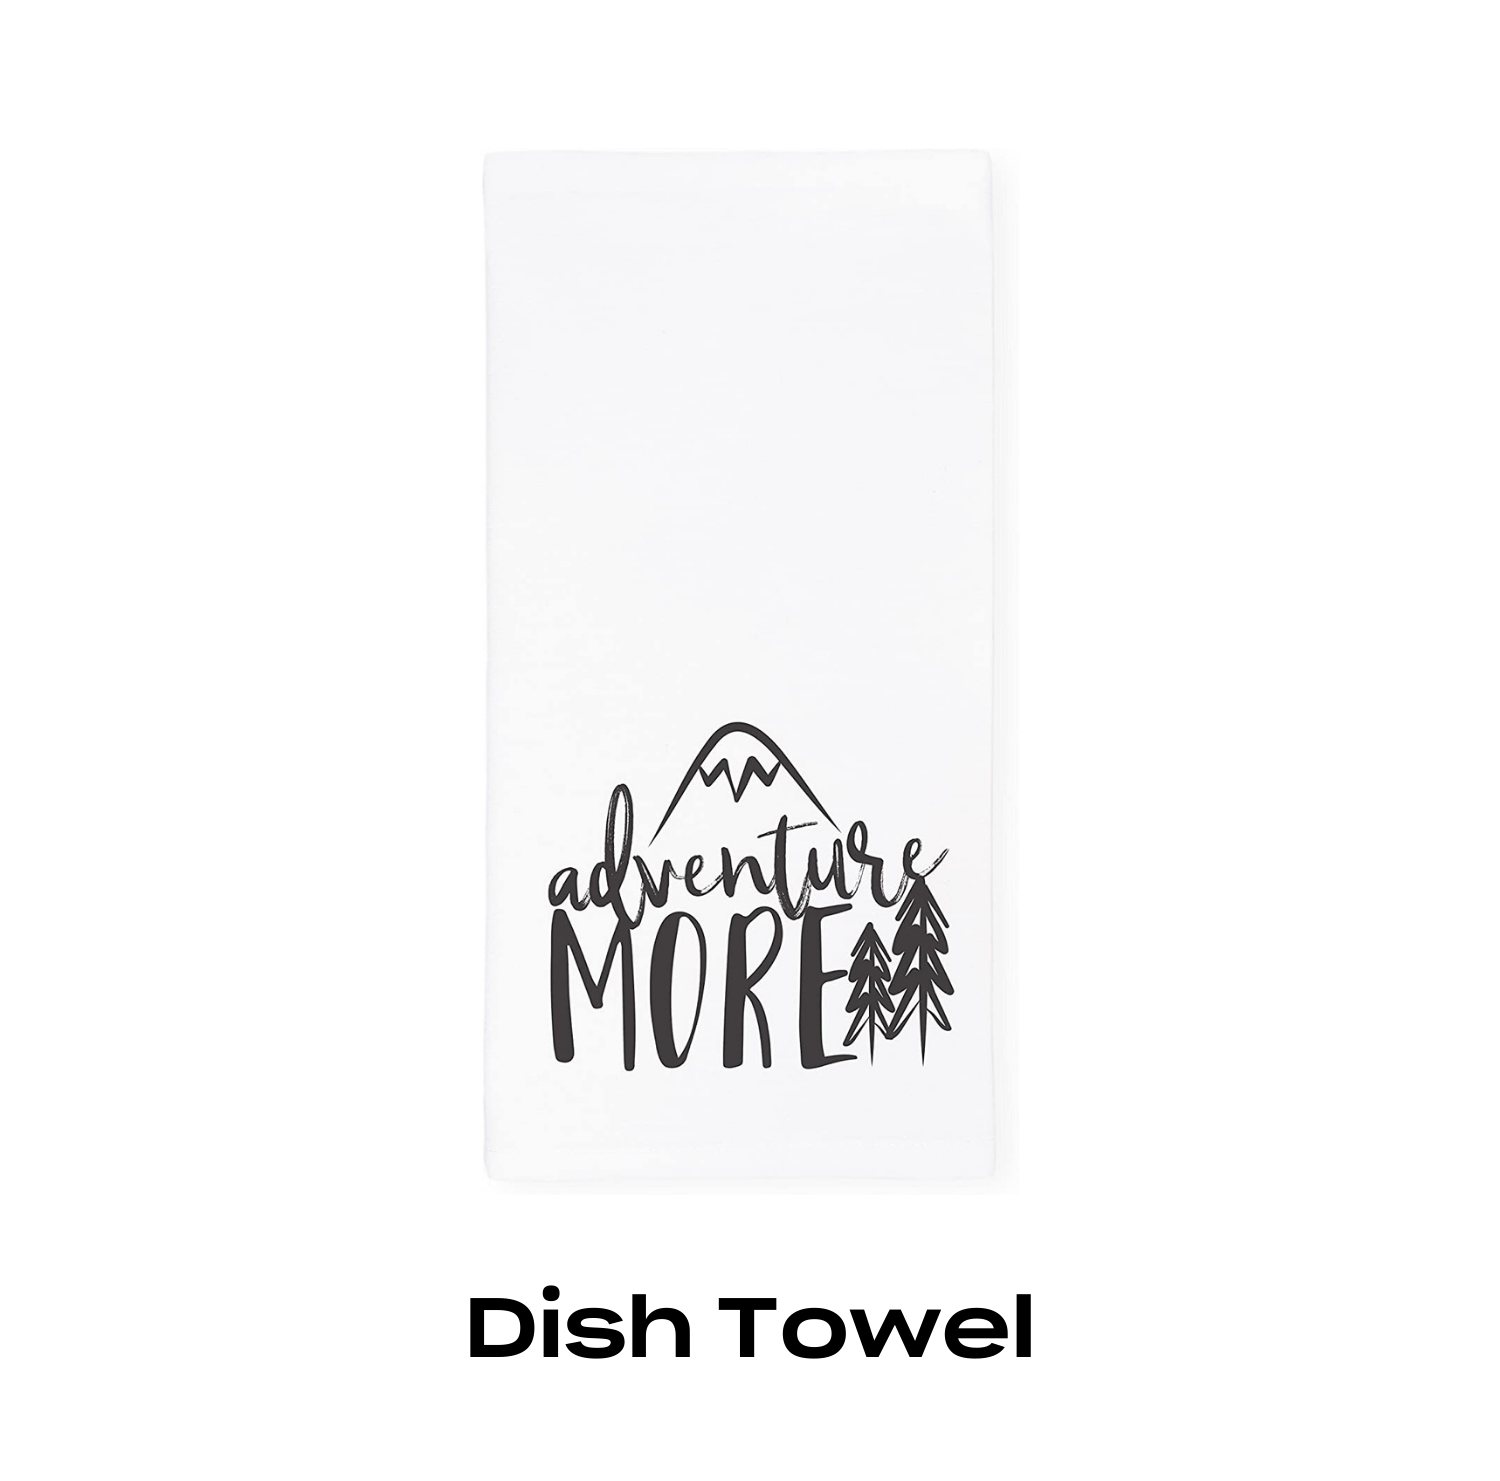 Graphic for a dish towel that says "Adventure More" on it, a great mother's day gift.